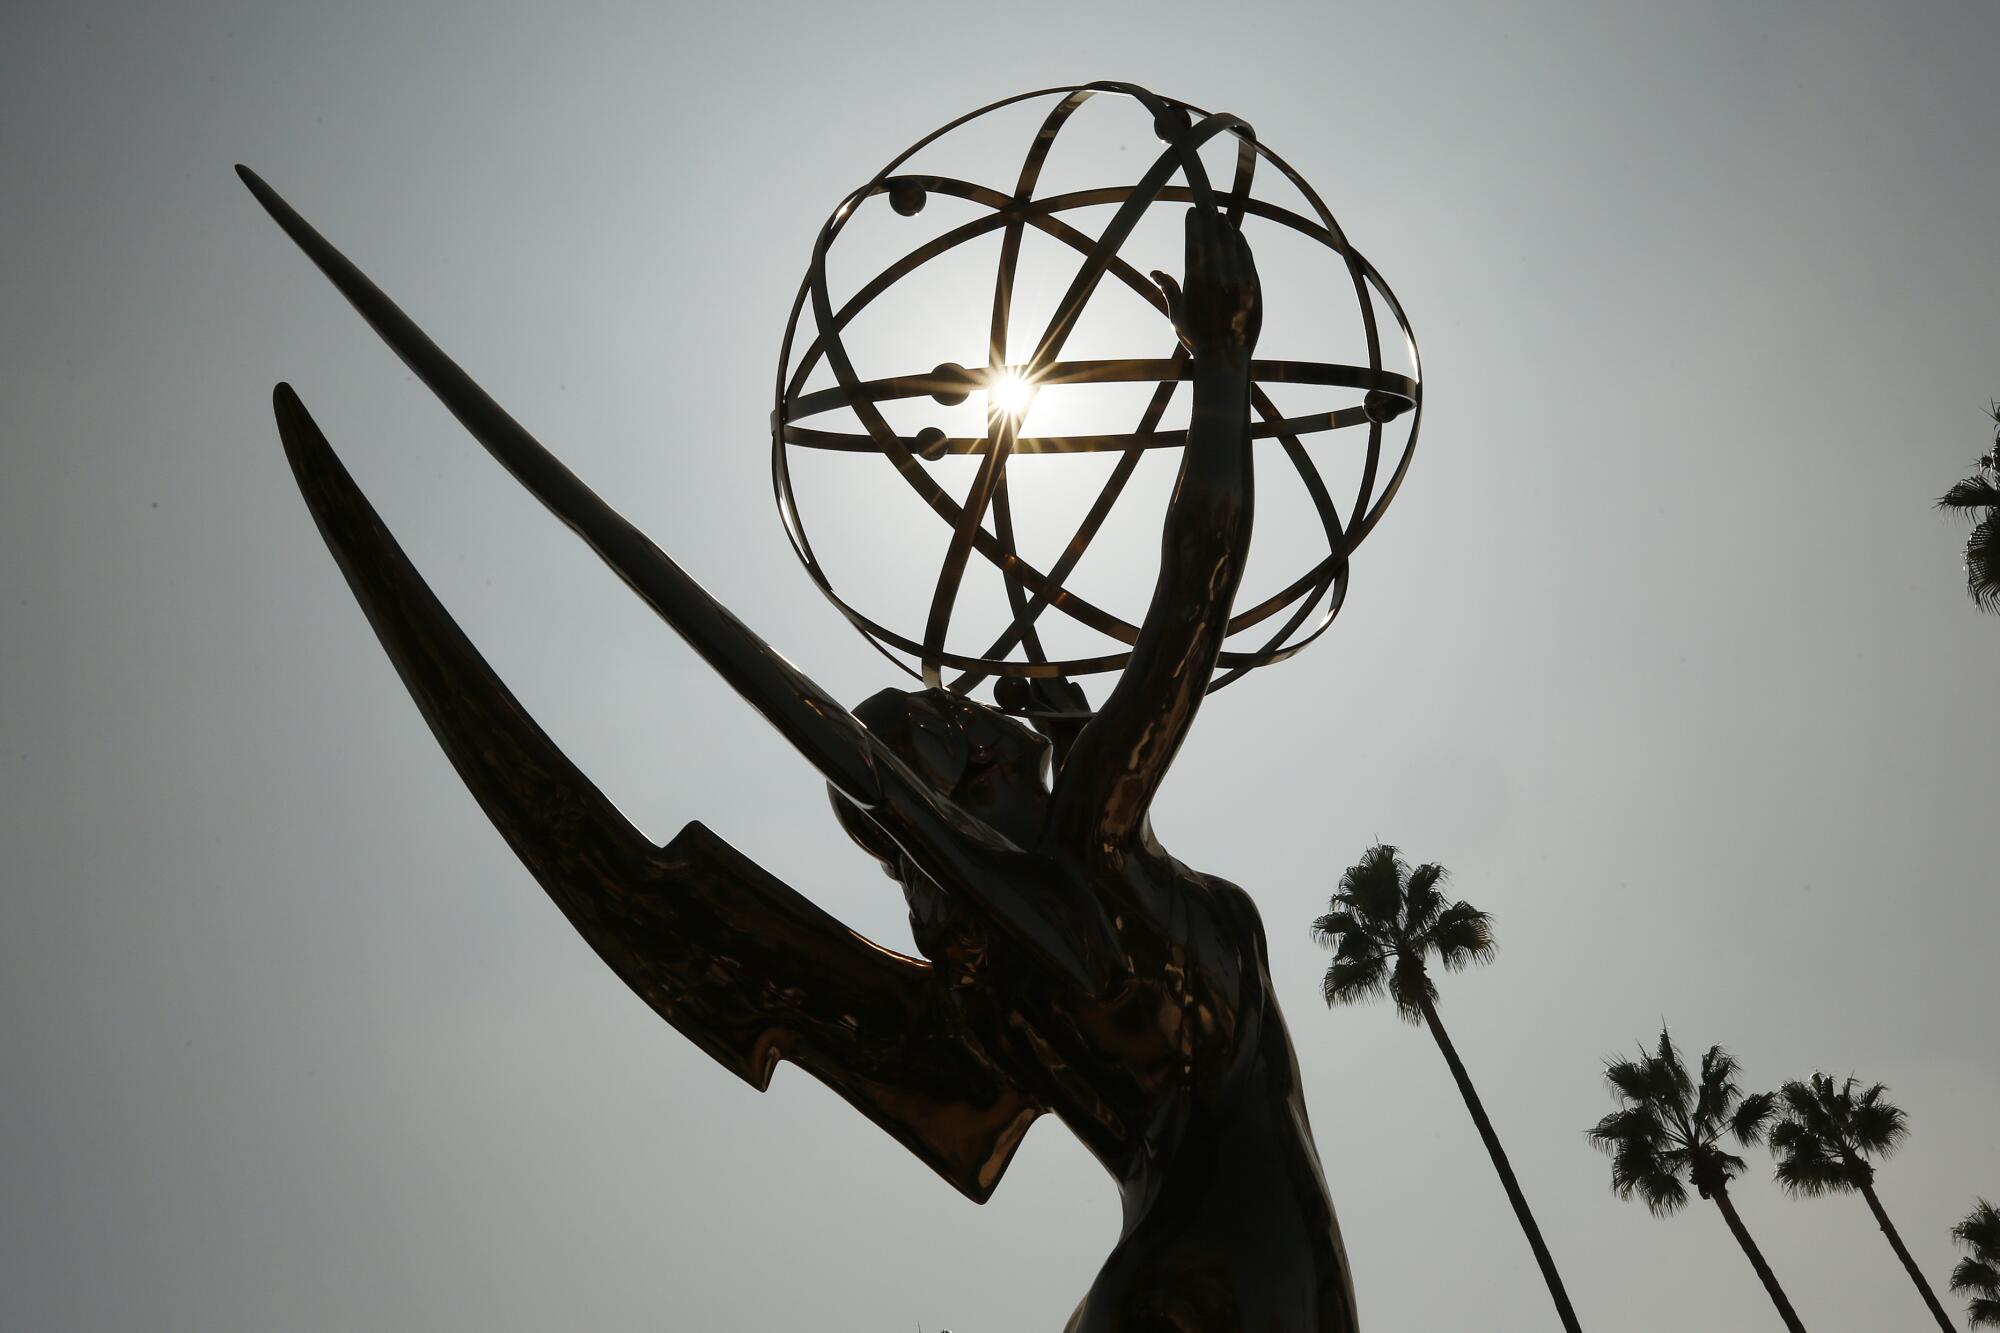 A large Emmy Award statue in silhouette with palm trees in the background